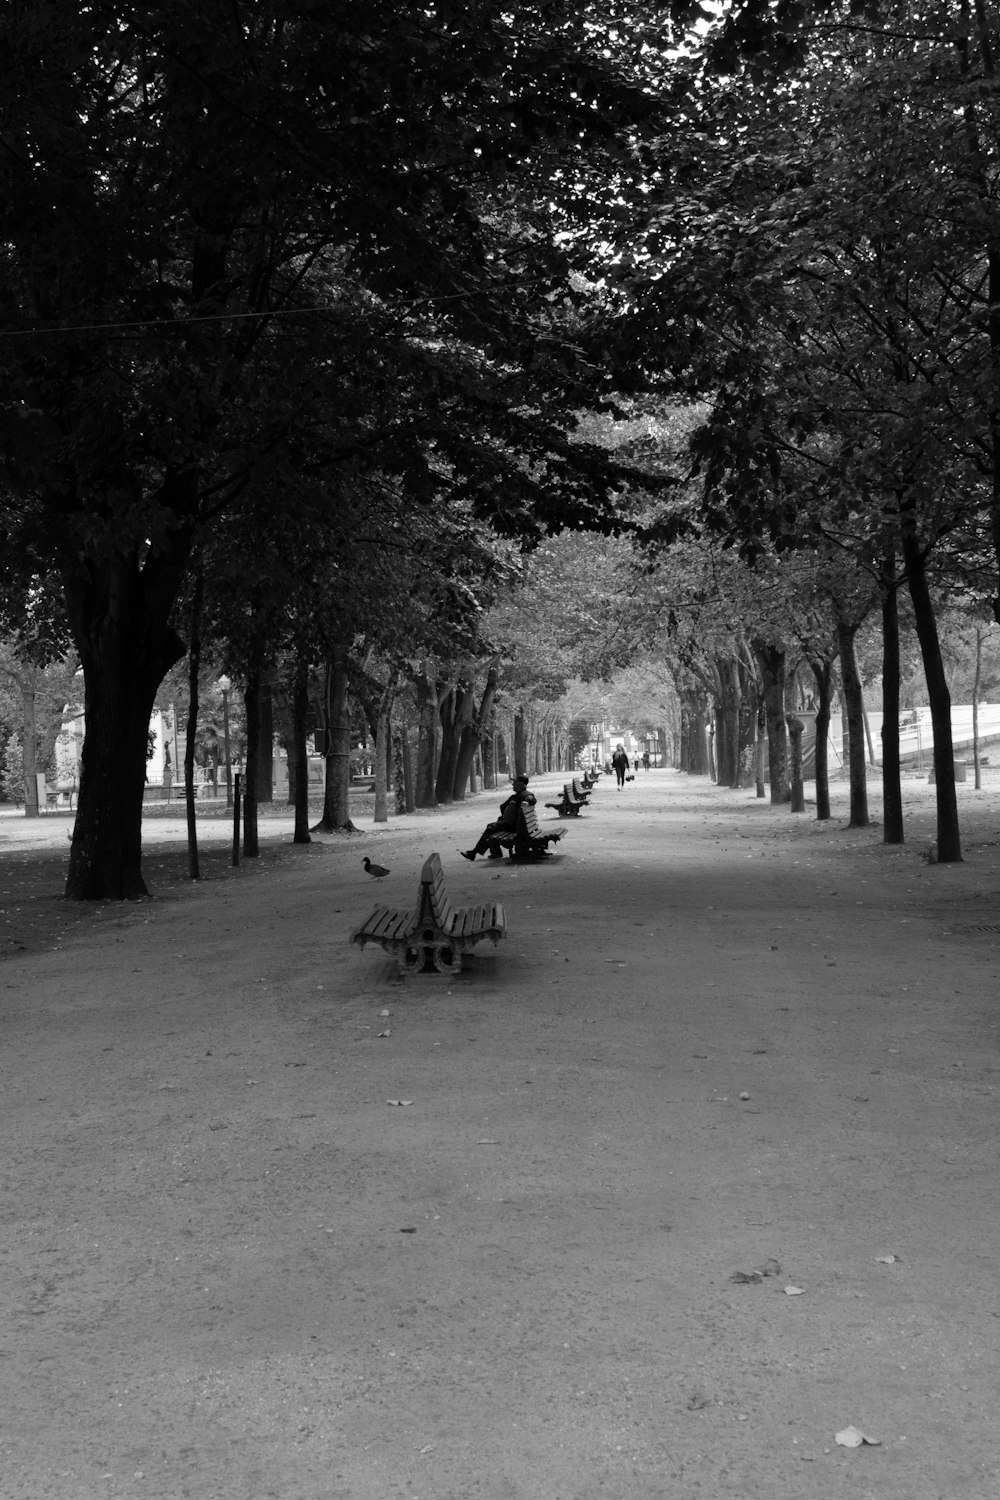 a person sitting on a bench in a park